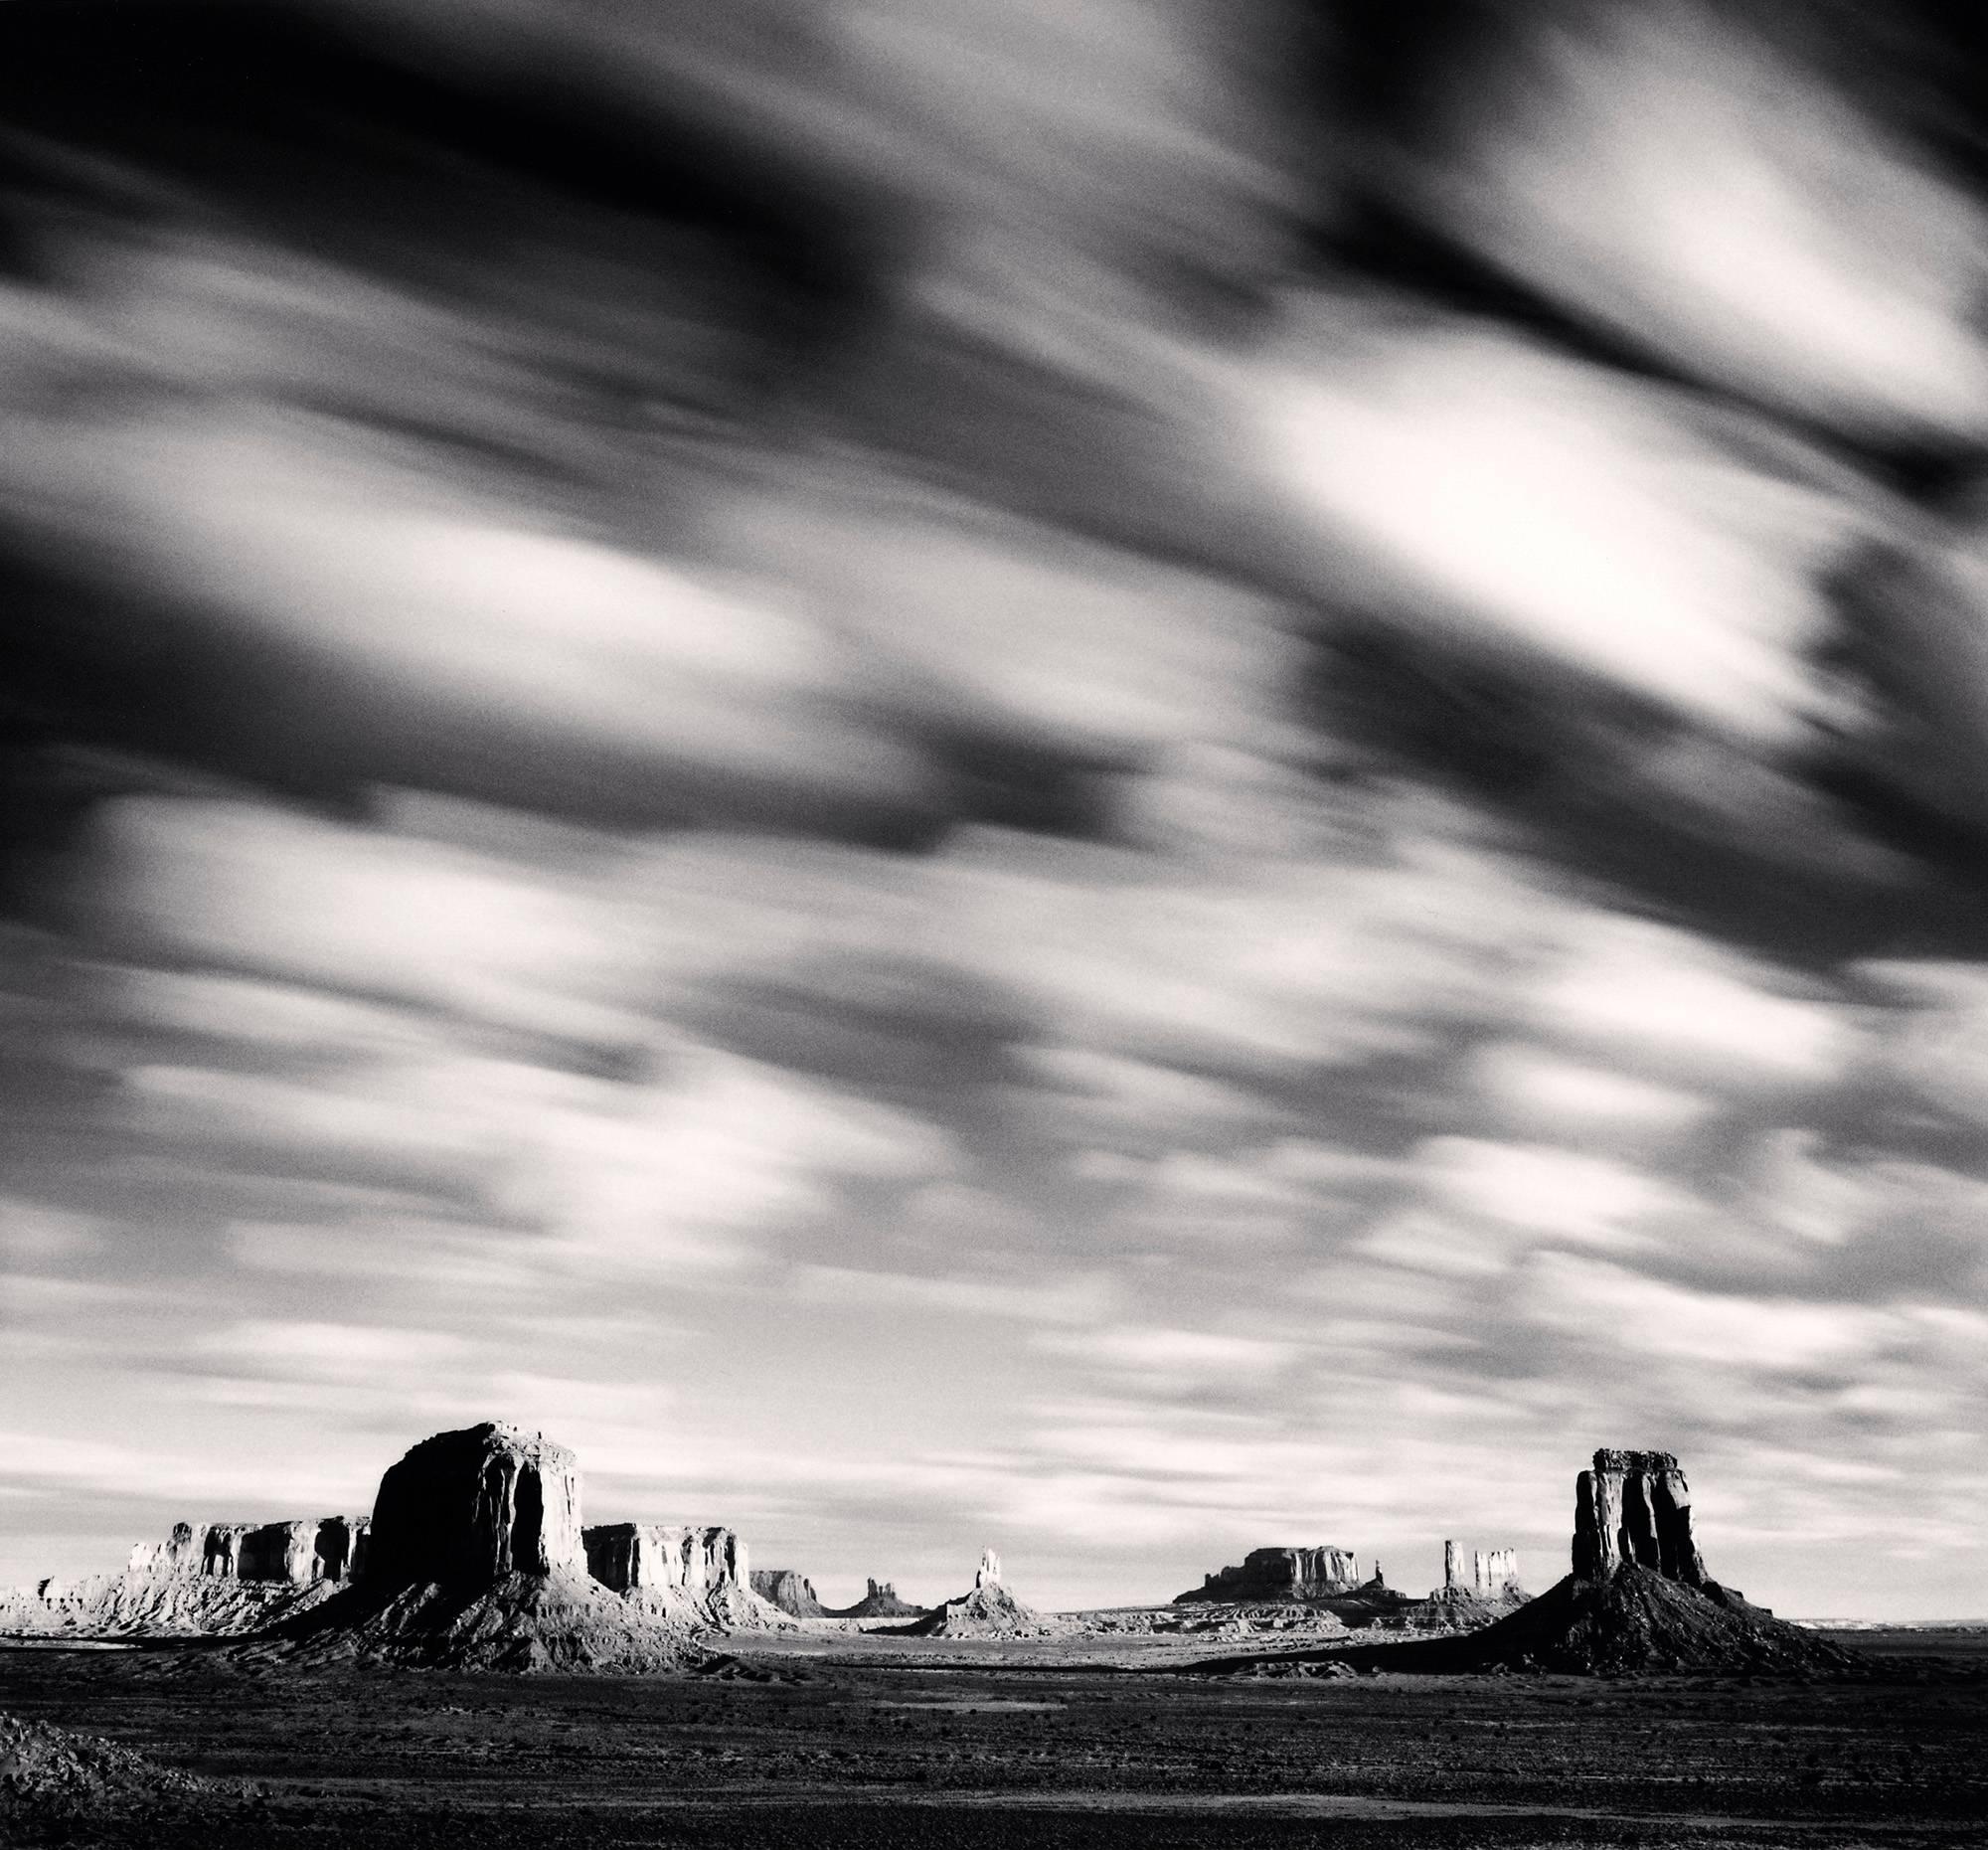 Michael Kenna Black and White Photograph - Morning Clouds, Monument Valley, Utah, 2005